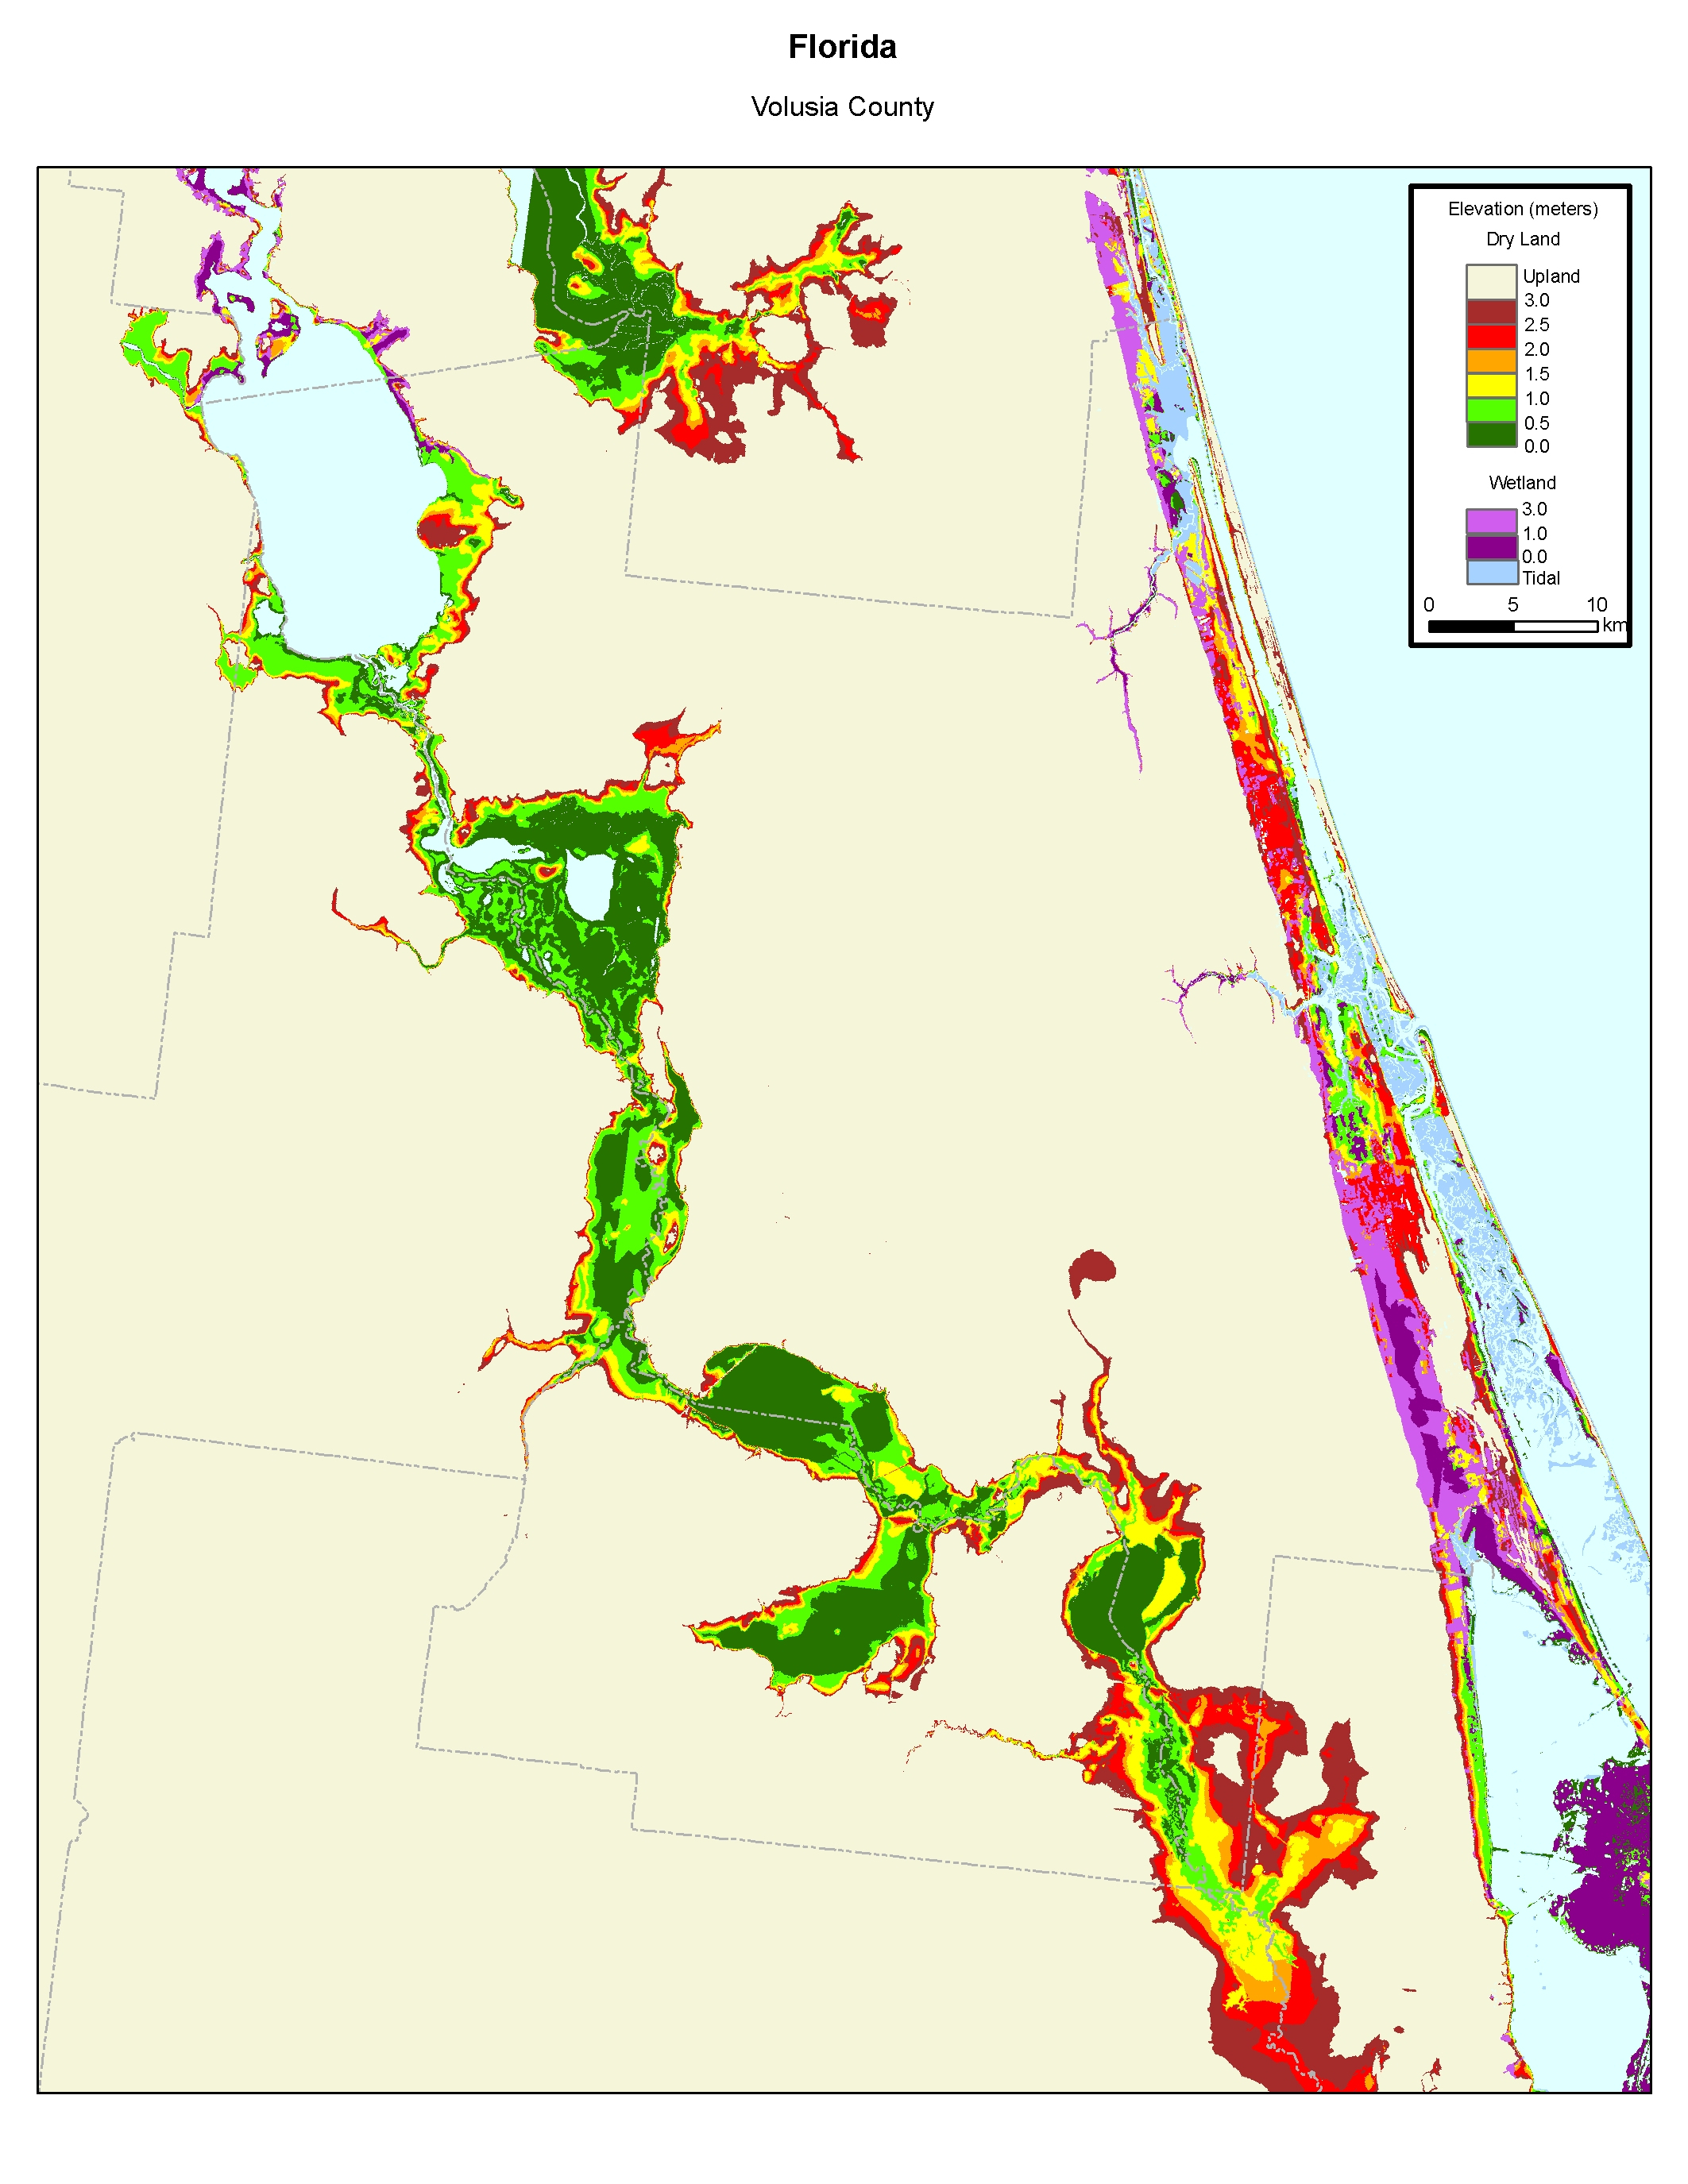 More Sea Level Rise Maps Of Florida&amp;#039;s Atlantic Coast - Florida Elevation Map By County